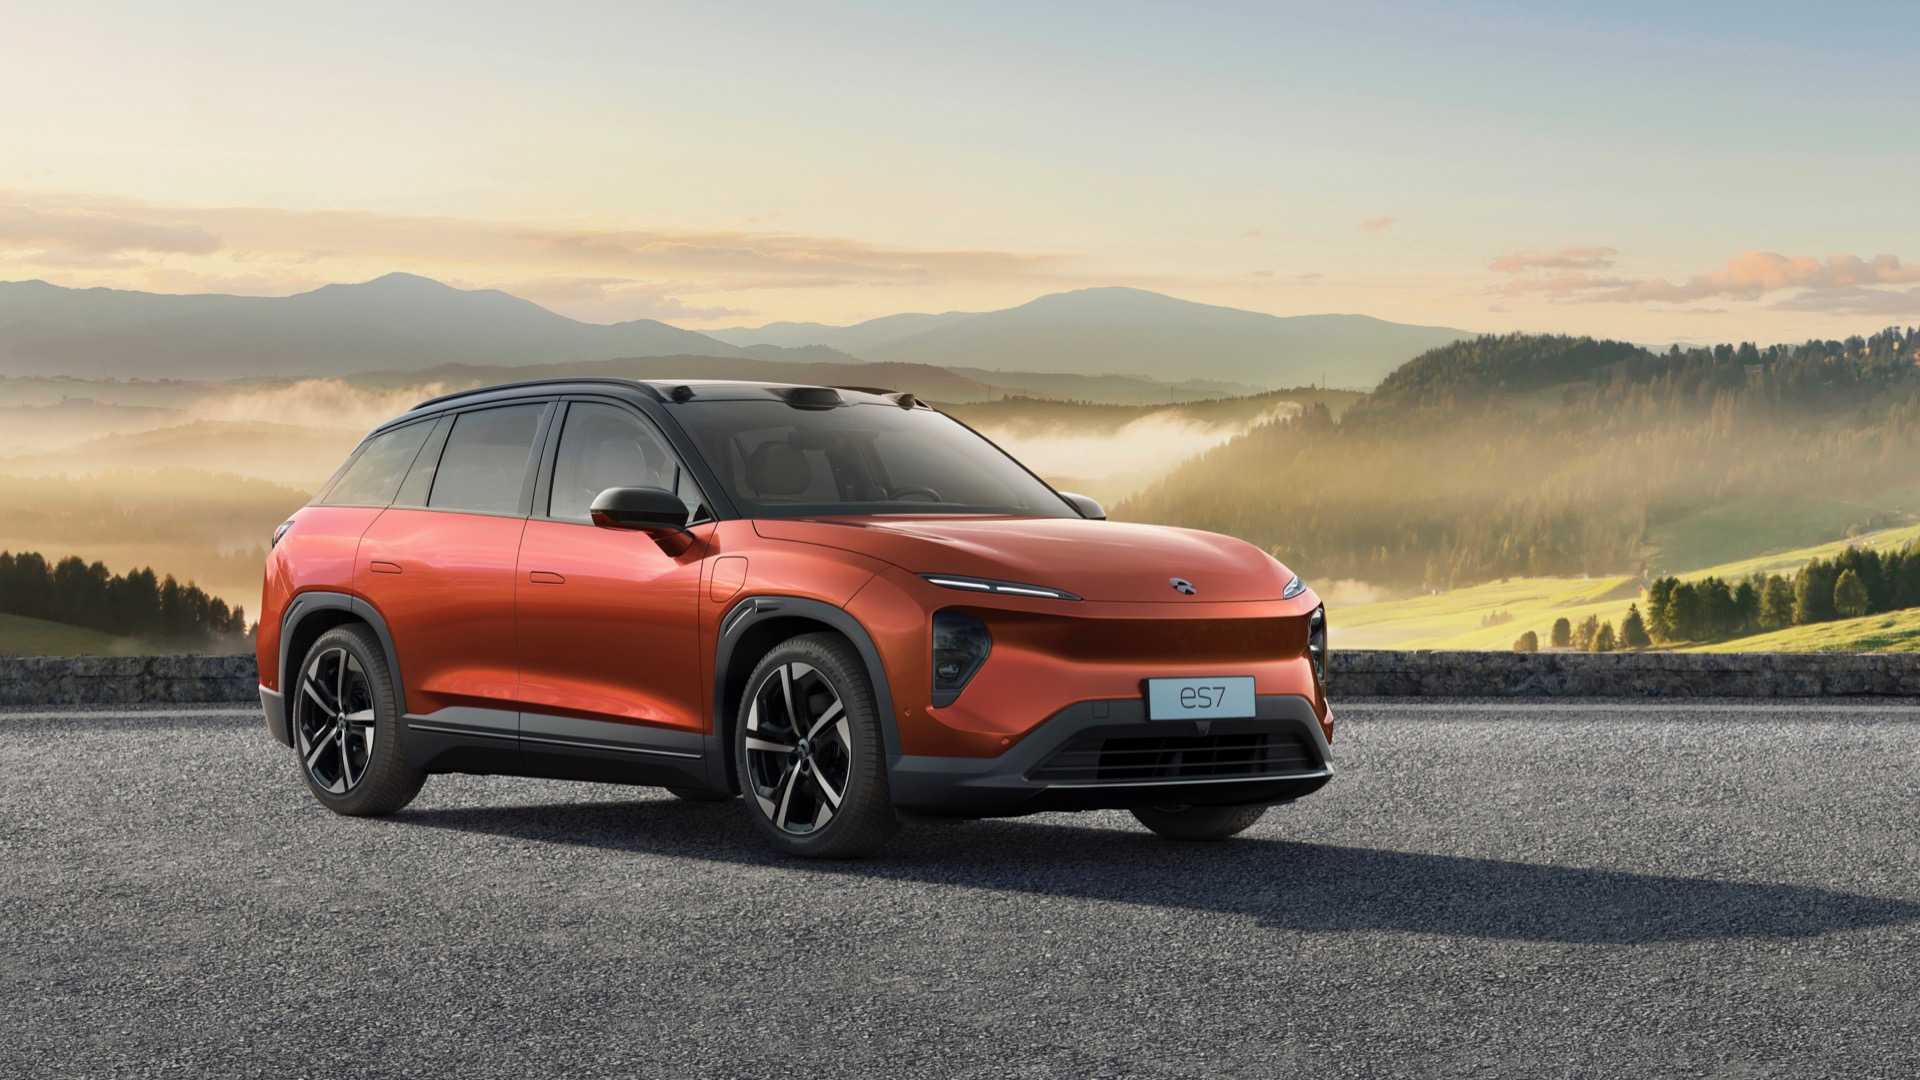 Nio ES7 kicks off new generation of electric SUVs for Chinese automaker